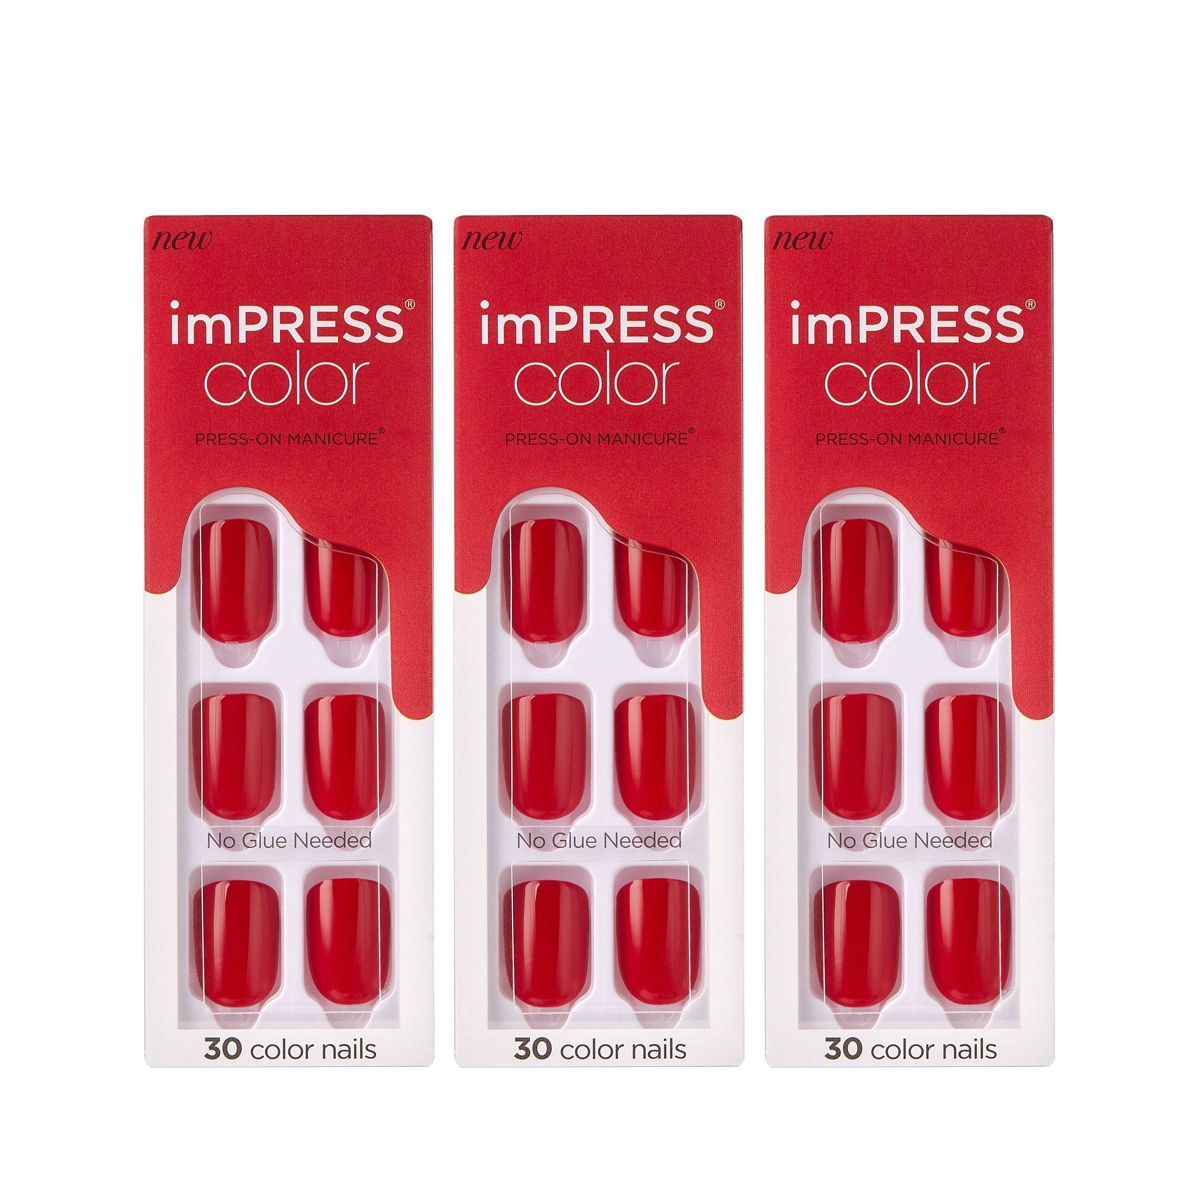 Kiss imPRESS Press-On Manicure Fake Nails - Reddy or Not - 90ct | Target